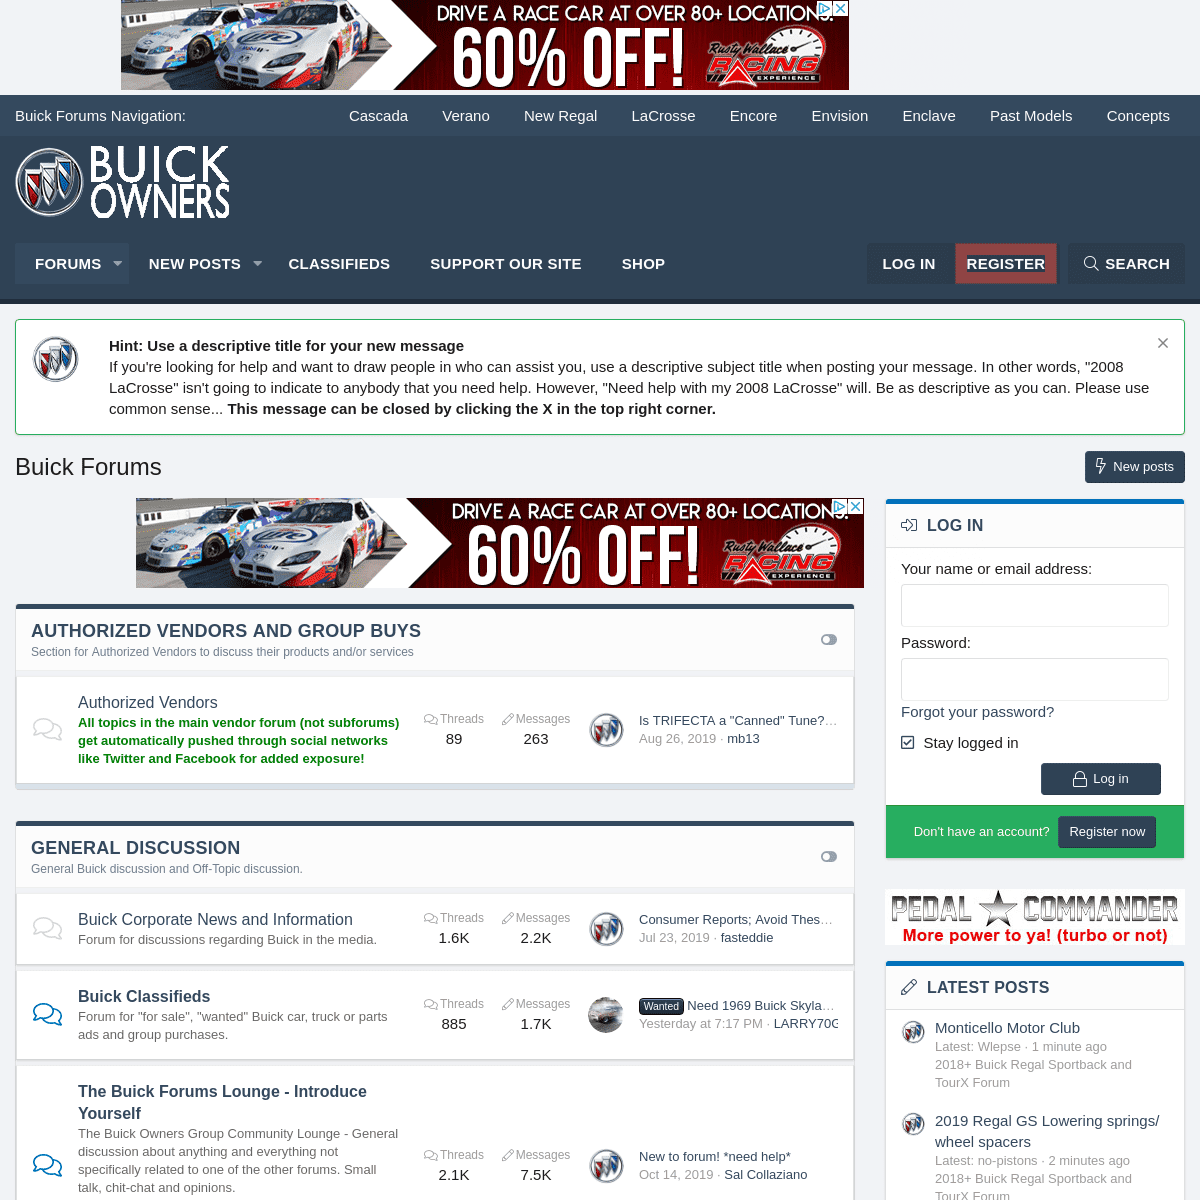 A complete backup of buickforums.com